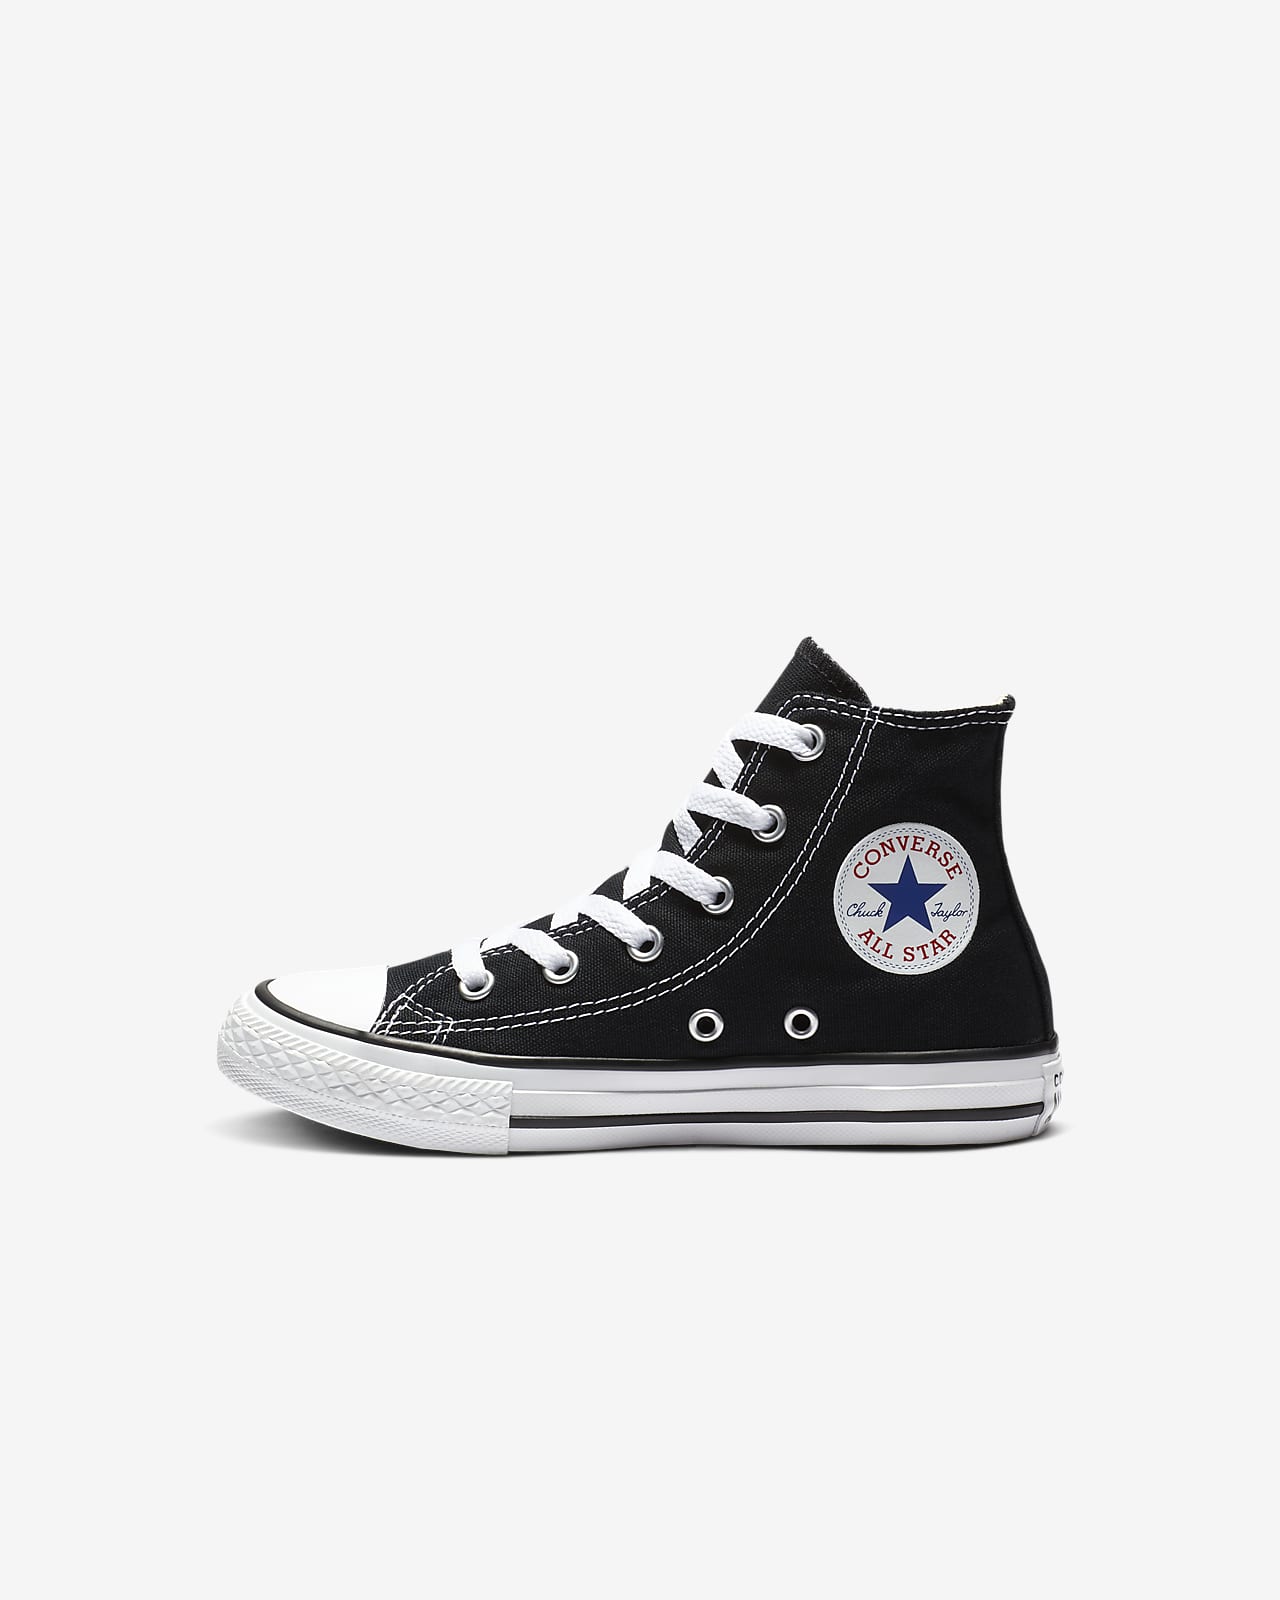 childrens white converse high tops